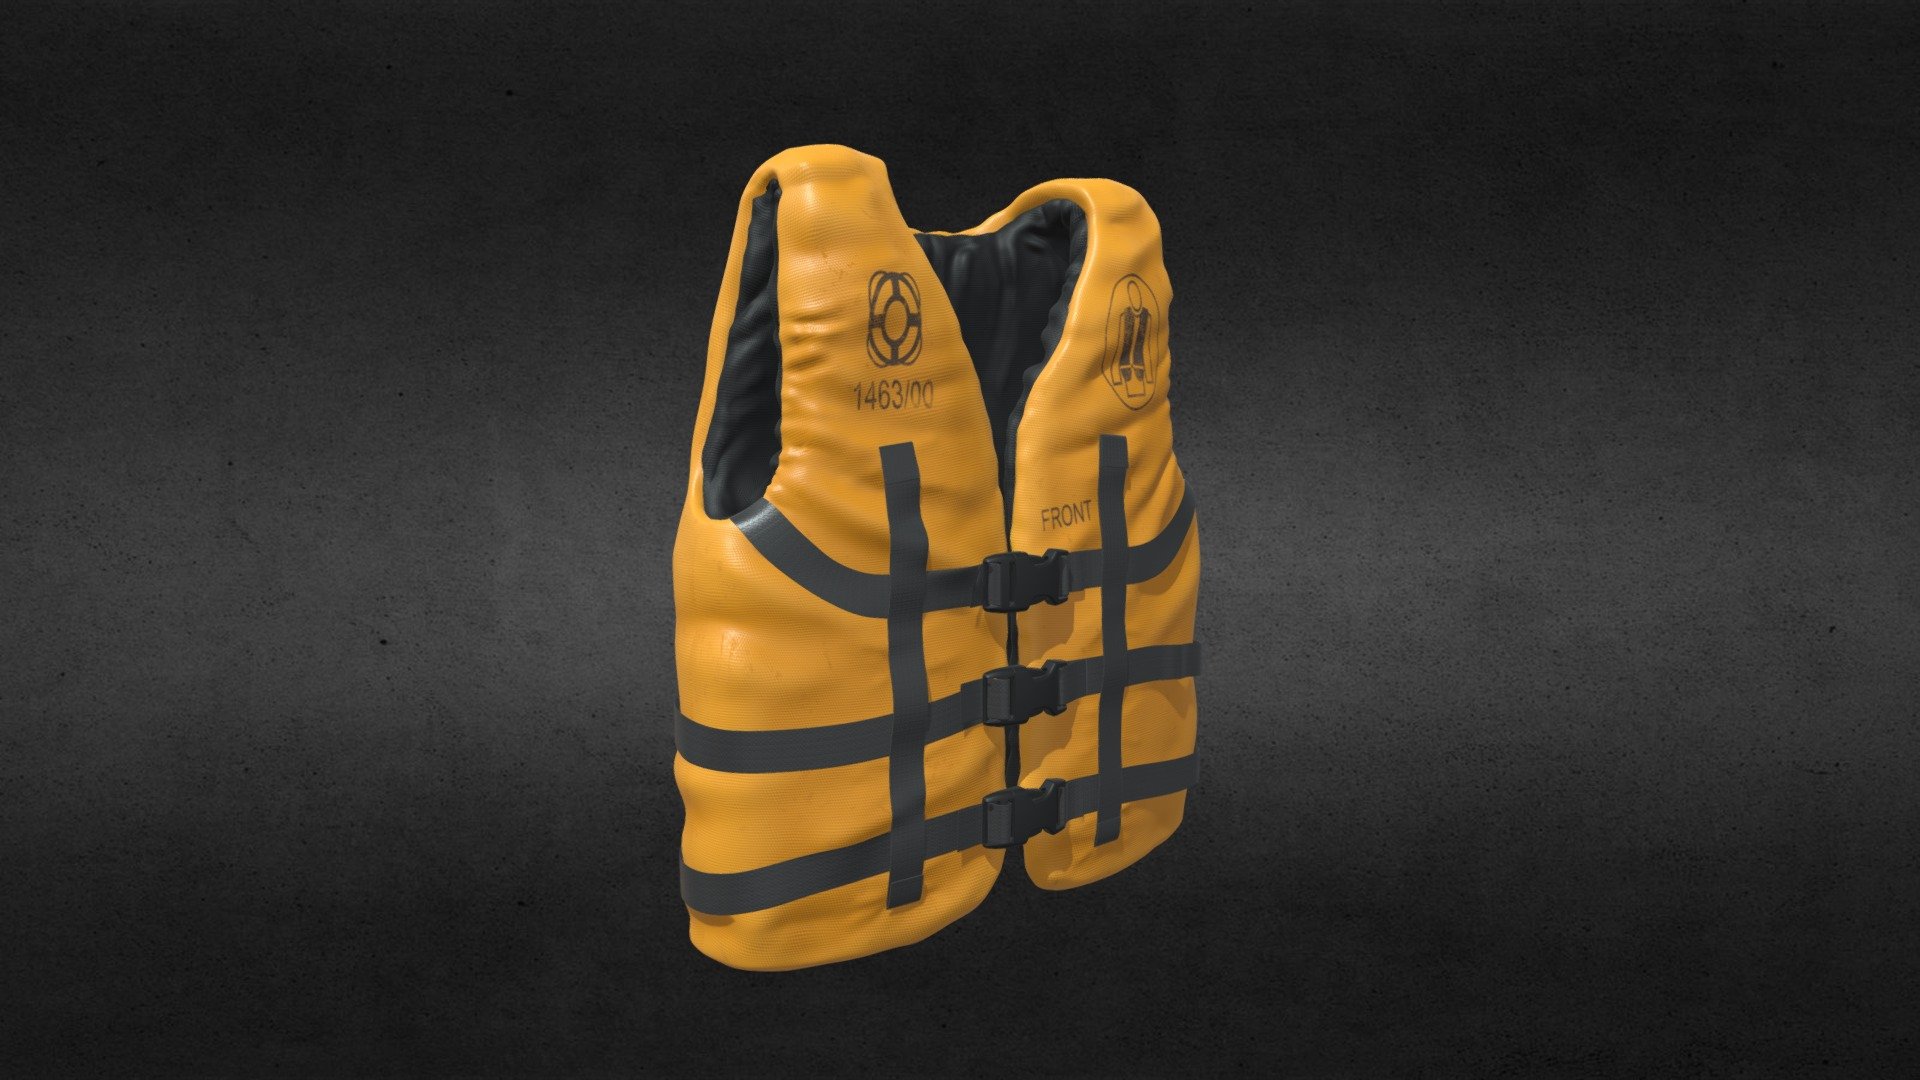 Life jacket made for one of my projects 3d model